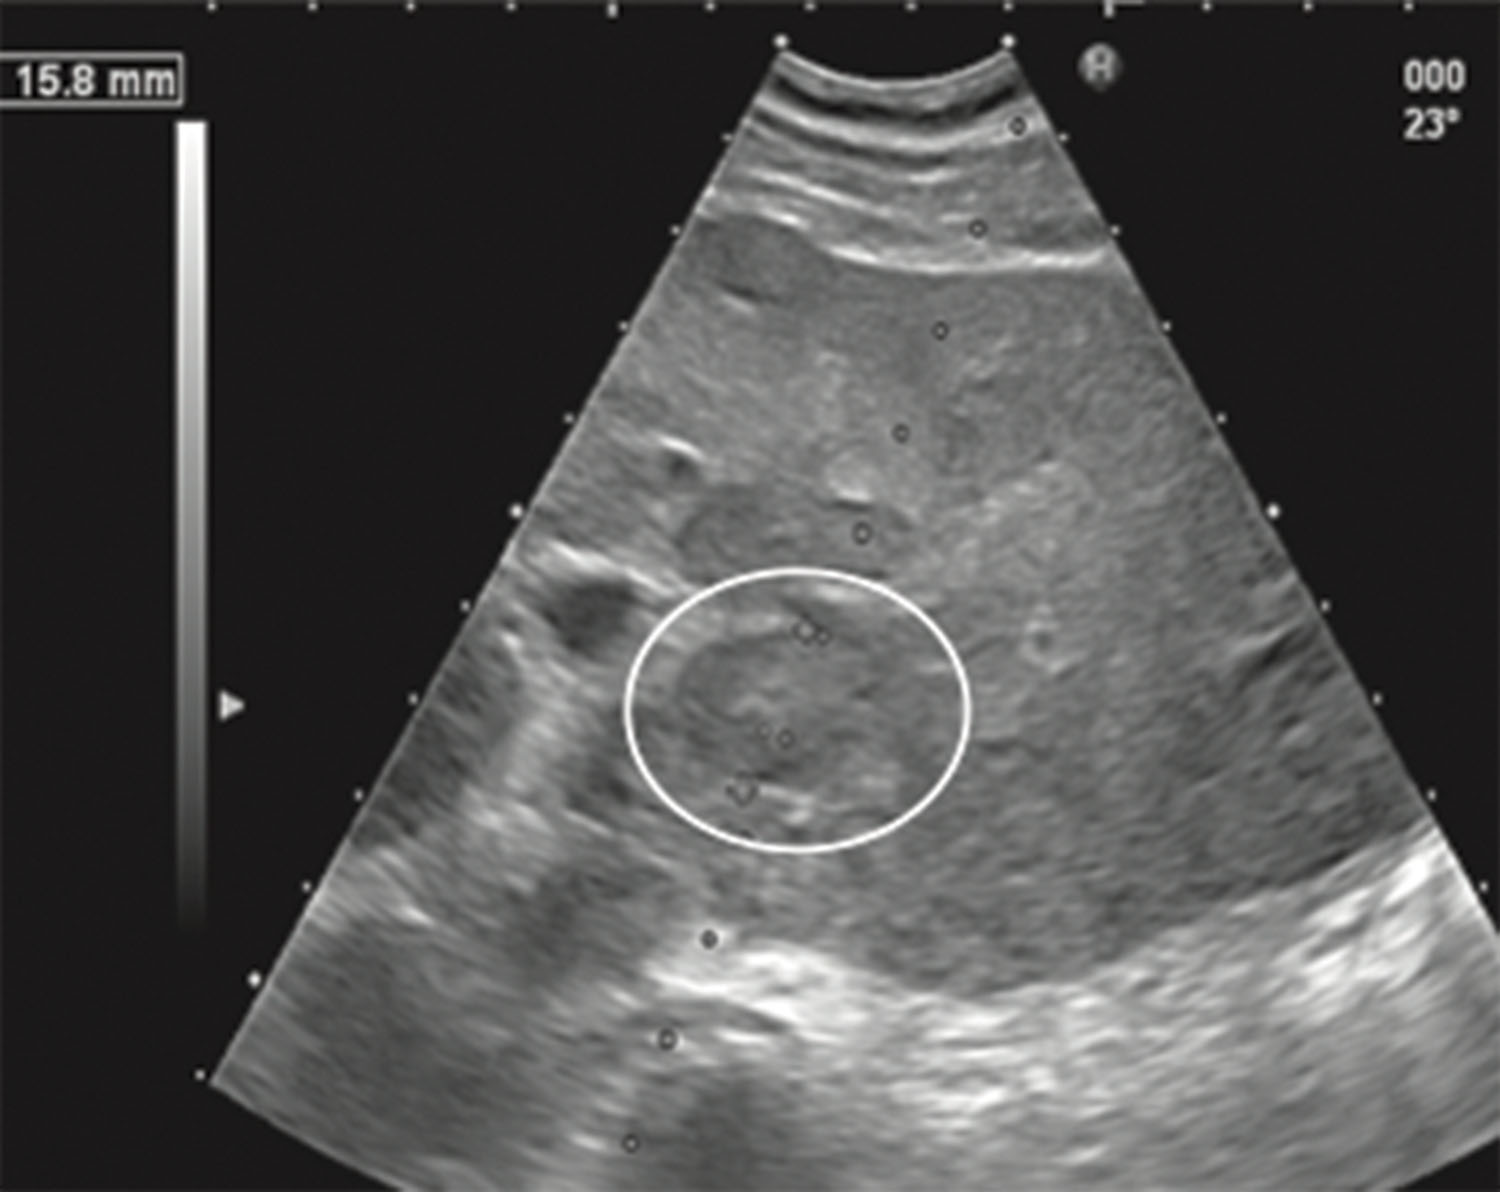 Fig. 18.11, The sonographer measured the lesion (calipers in circle) to determine the size of the core needle to be used. The diameter of the lesion along the needle path is 15.8 mm, so a 15-mm throw is needed to stay within the lesion.